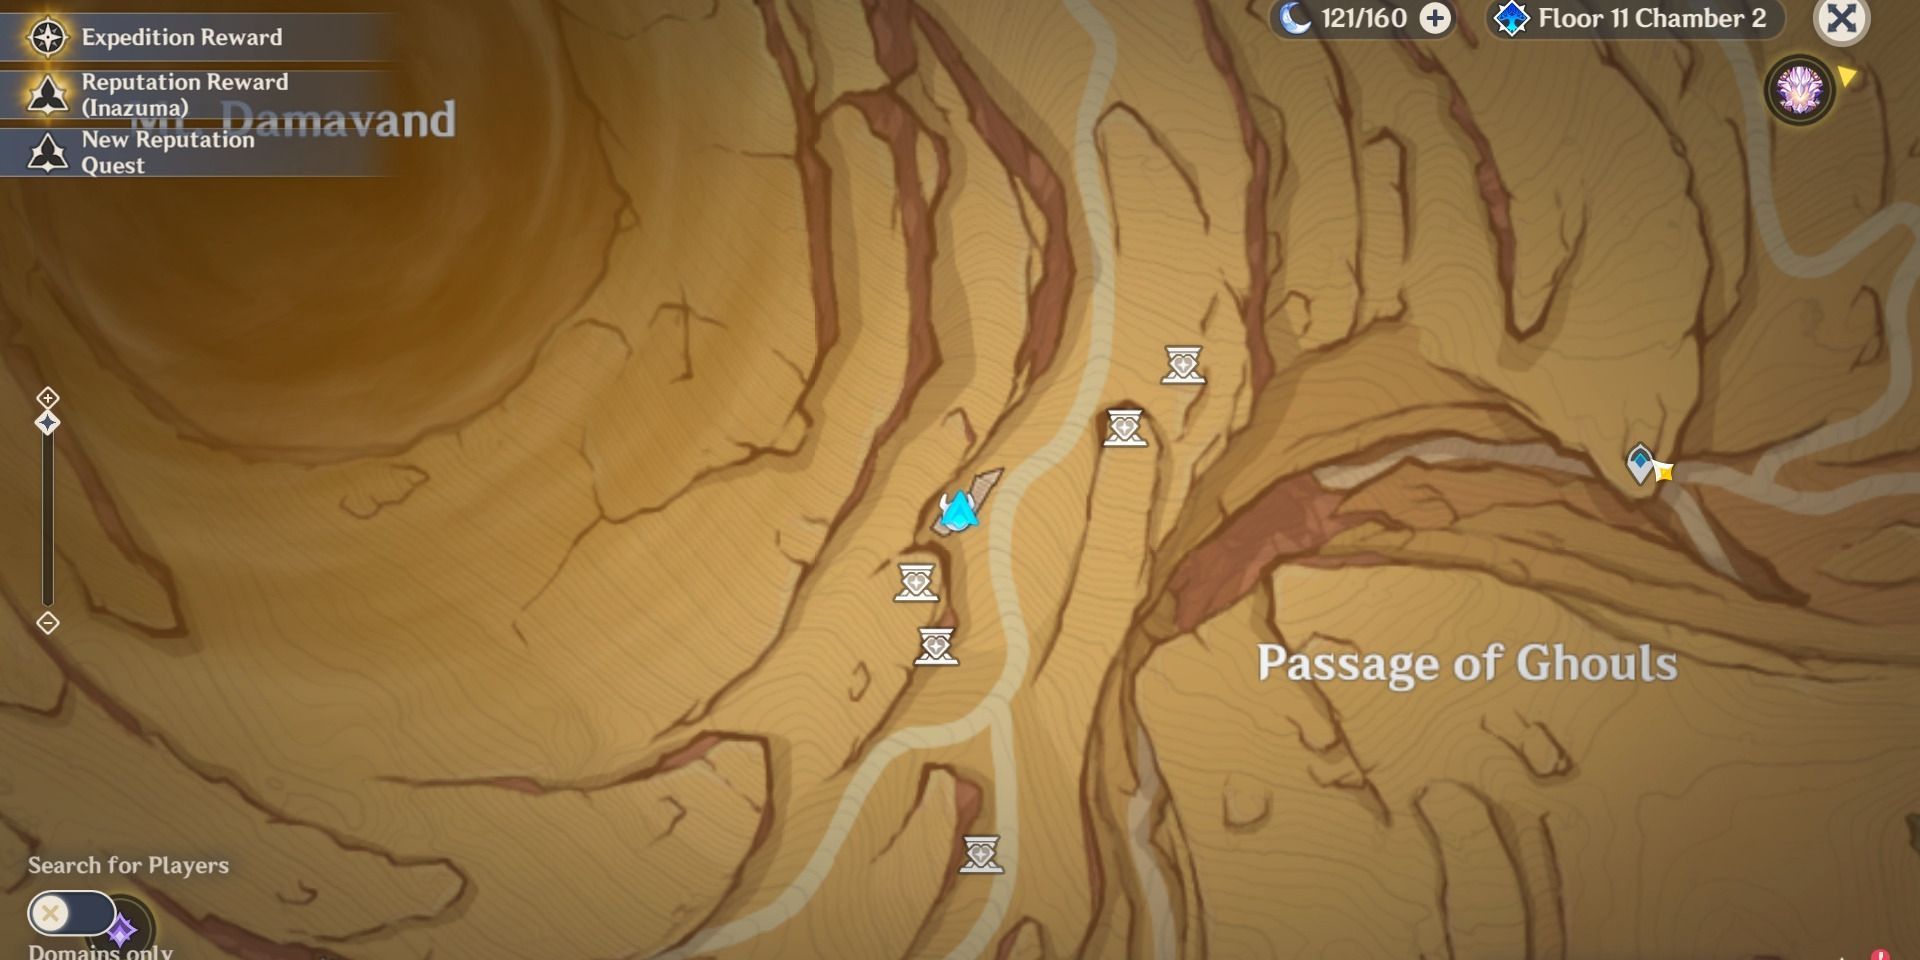 Image of the location on the map of the sixth mysterious stone slate in Passage of Ghouls in Genshin Impact.